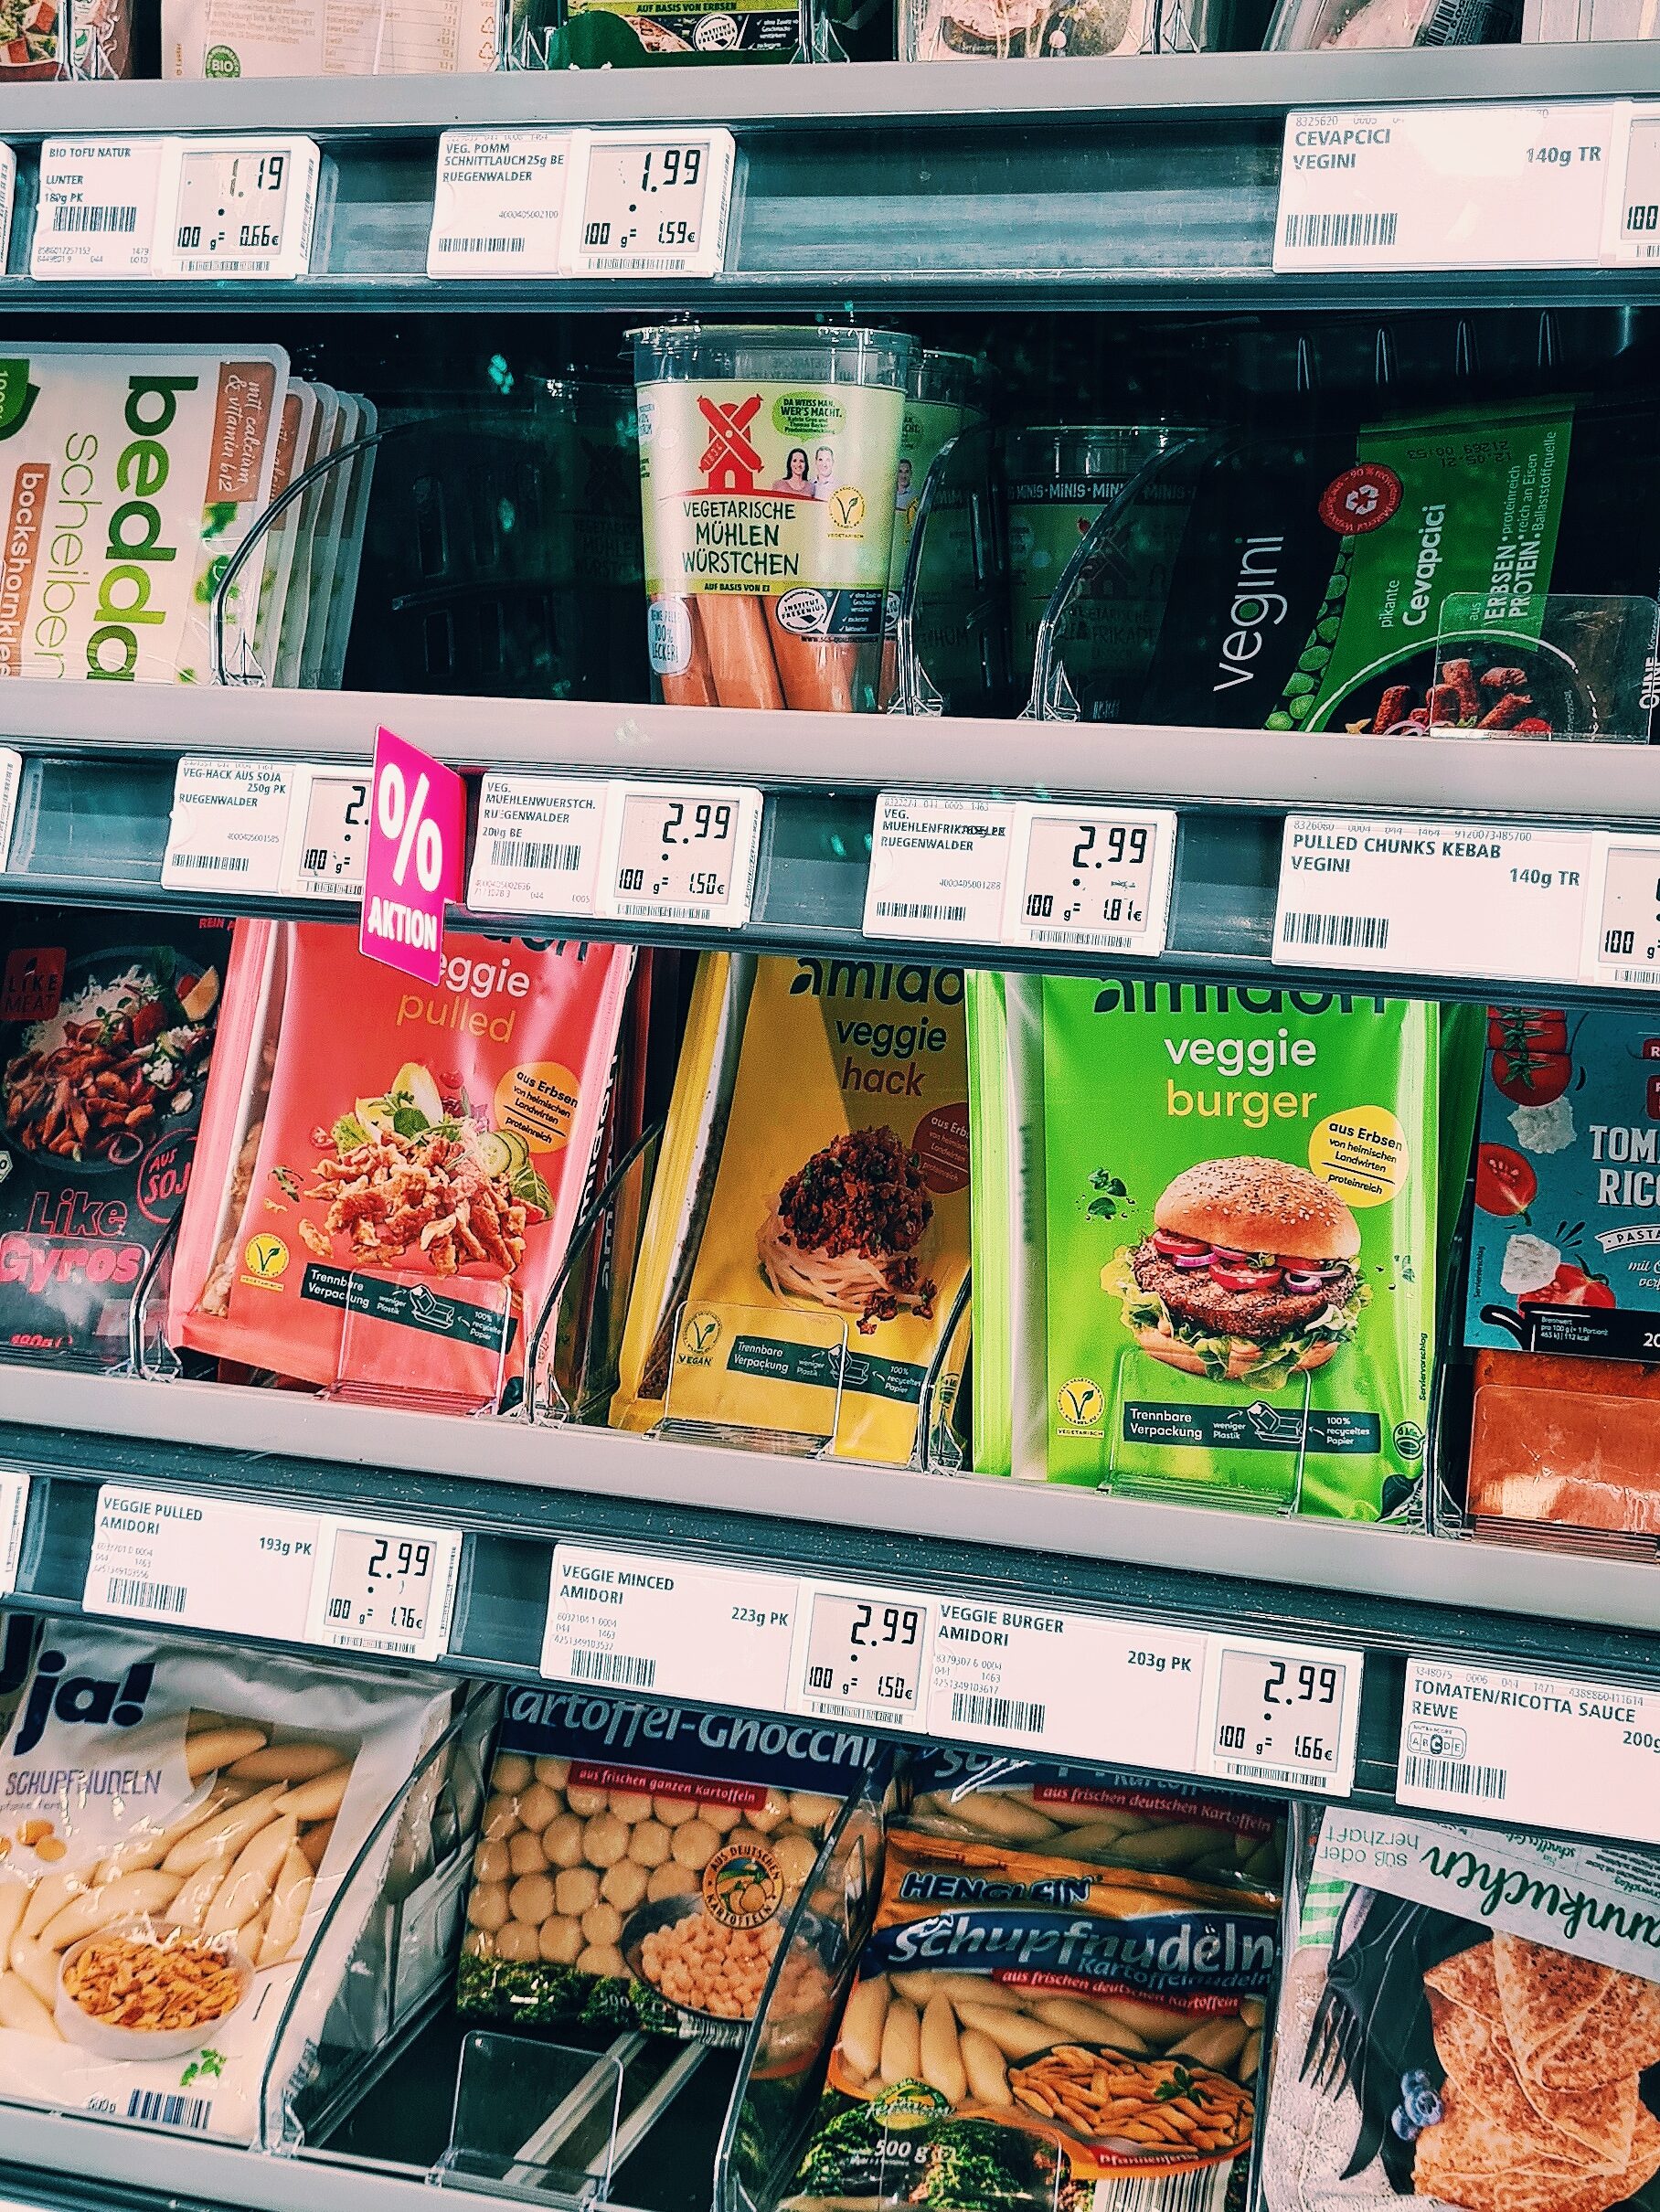 A photo of the refrigeratede vegetarian food section in the local Rewe supermarket.